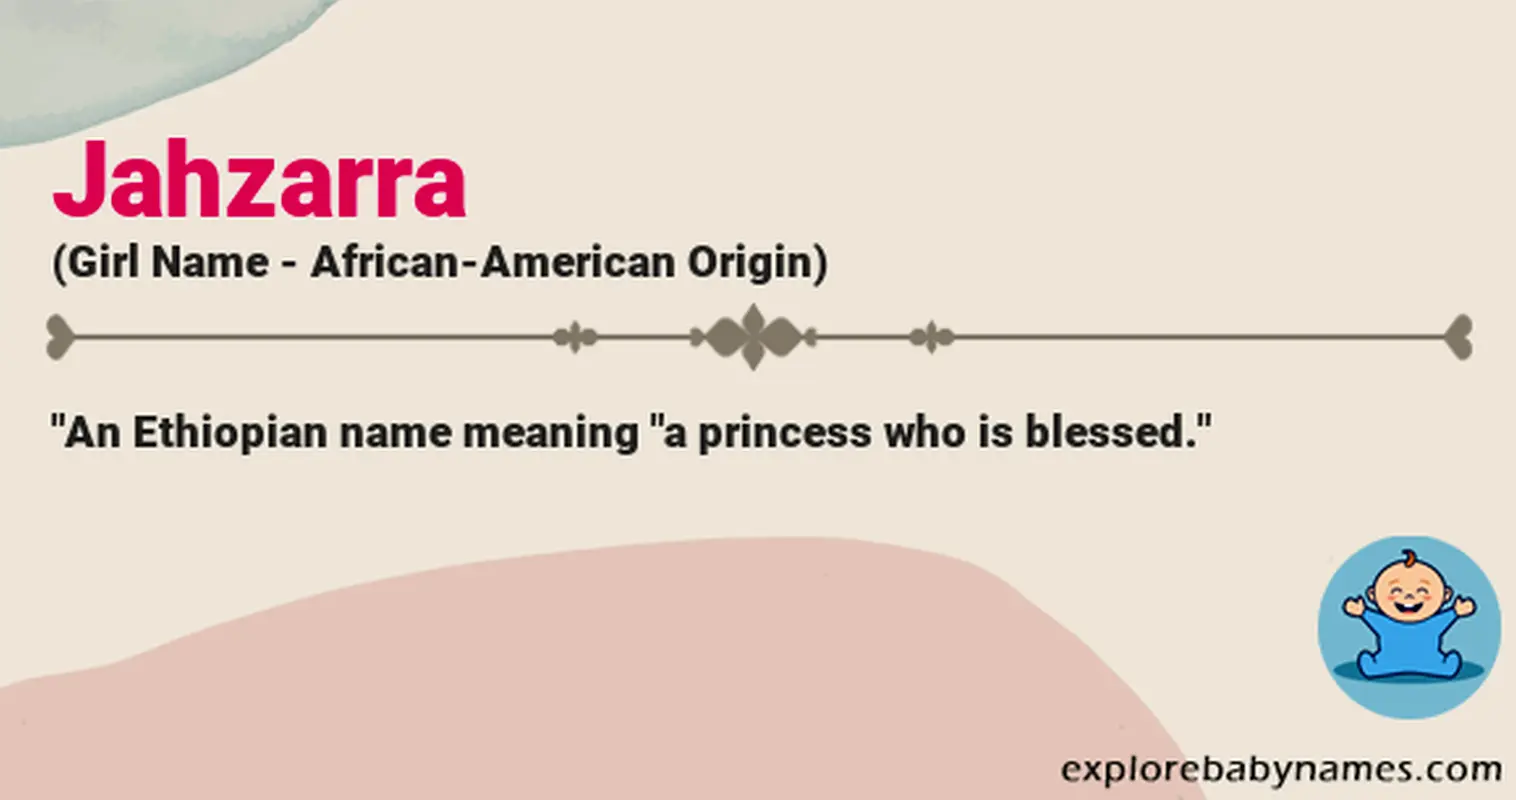 Meaning of Jahzarra